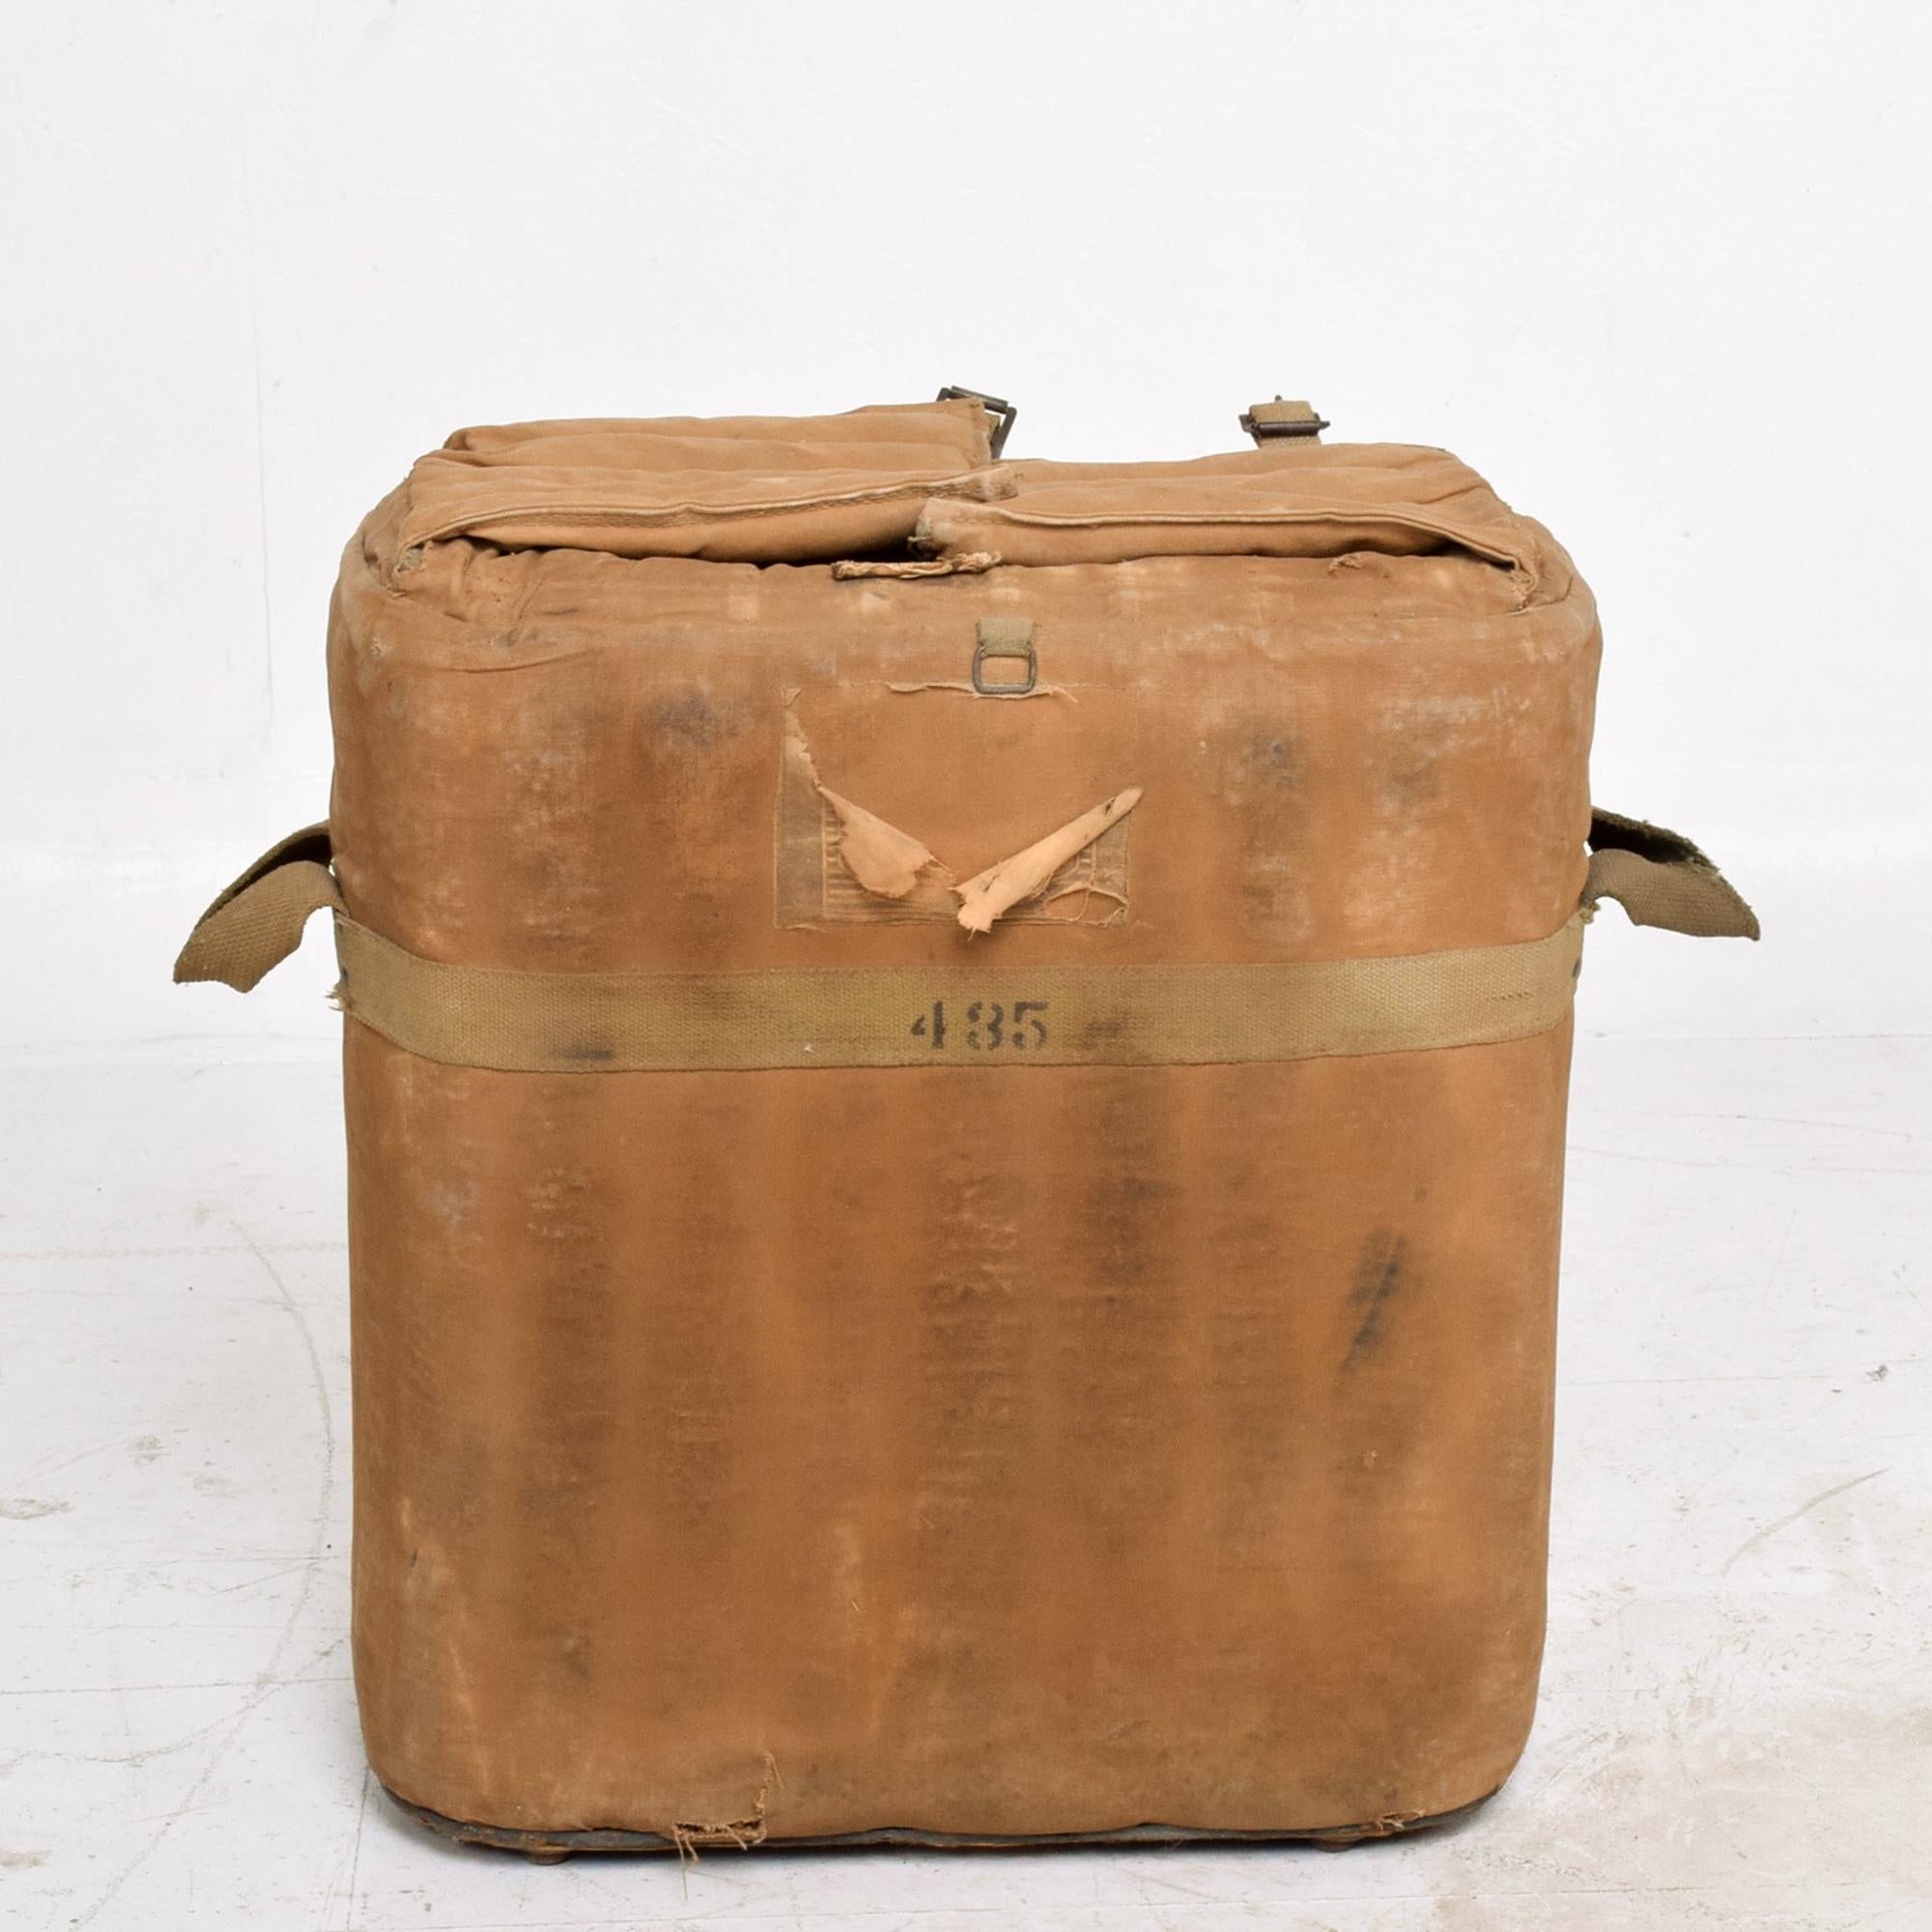 American Distressed Military Surplus Industrial ICE COOLER Tote Chest 1940s US Army